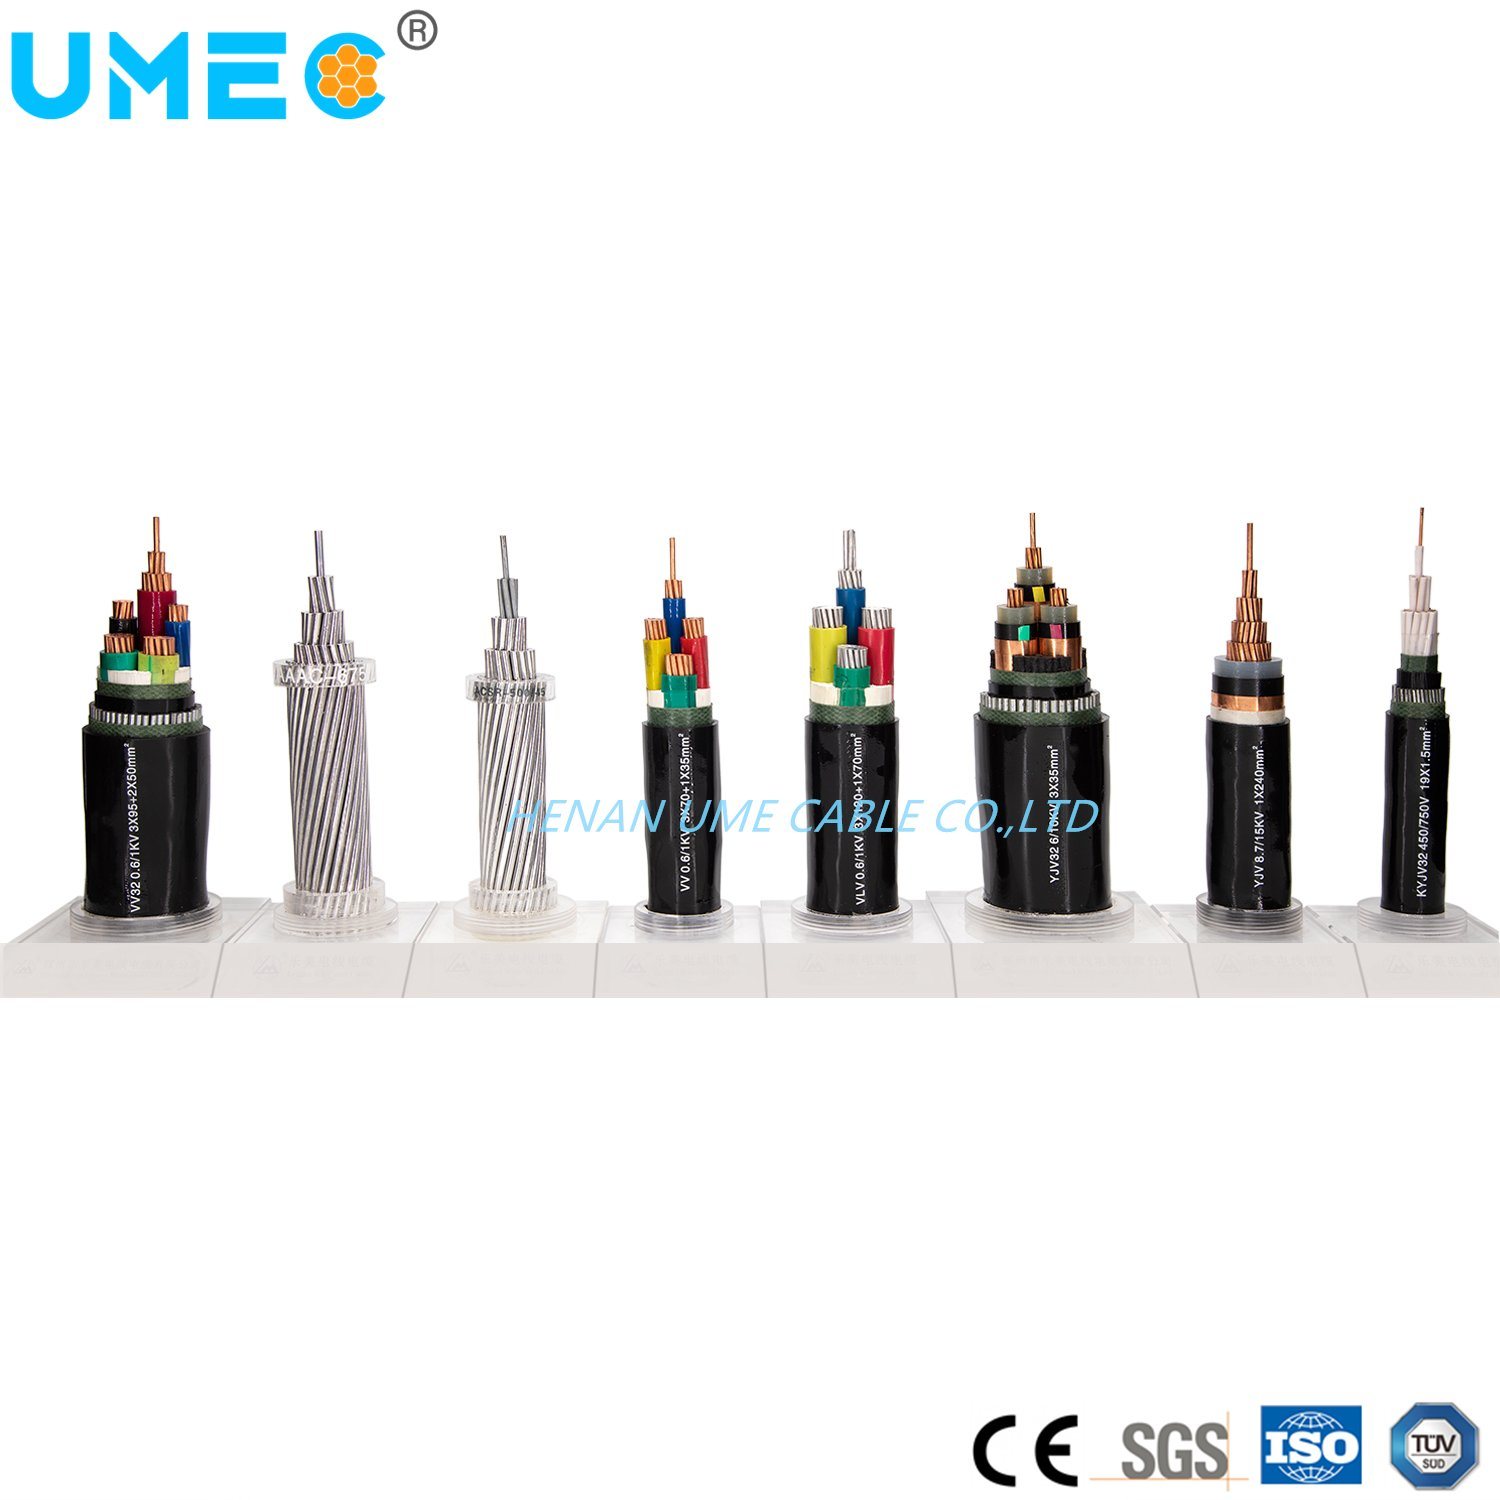 Medium Voltage 5-Core XLPE Insulated PVC Sheathed Power Cable